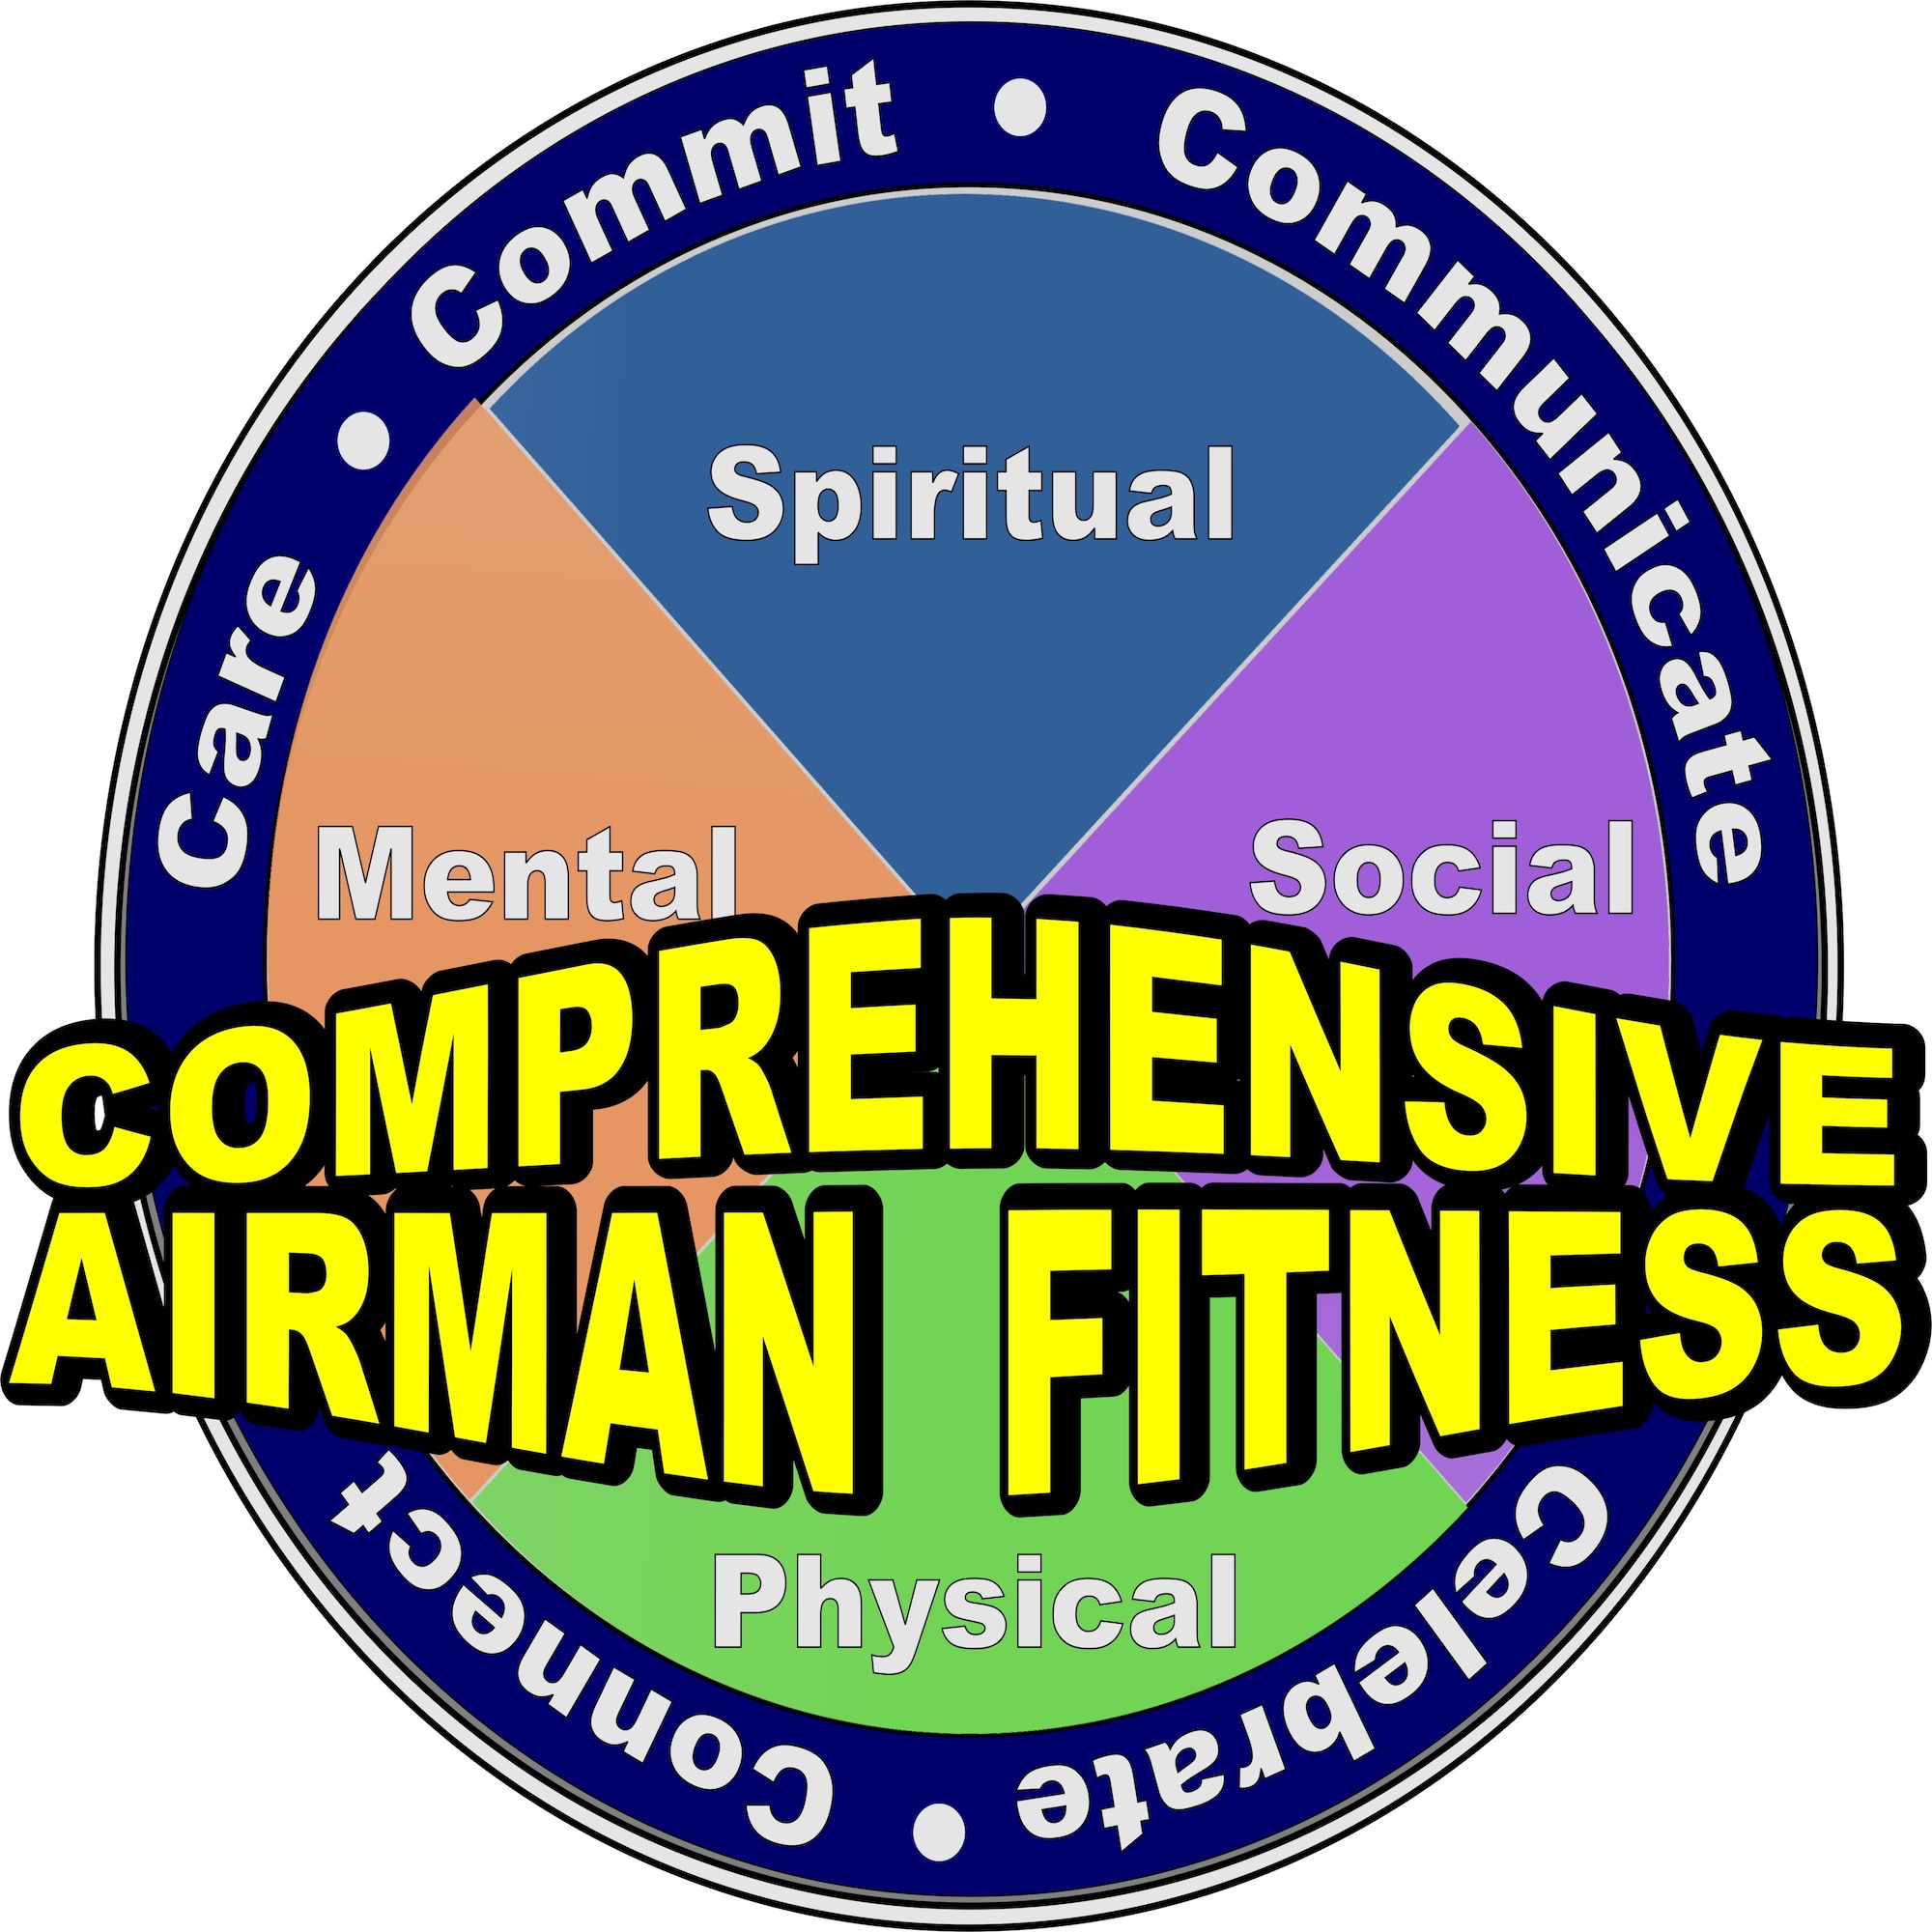 As operations tempo stays high across the Air Force, so do divorce rates, suicide rates and other negative trends. This demands more than just another program, but a new culture and way of thinking, Air Mobility Command officials said. Comprehensive Airman Fitness answers that demand. Through Comprehensive Airman Fitness, the force can become more resilient through awareness of two principles. First, when a person behaves positively in everyday situations, it shapes how they react when tough times hit. Secondly, health is more than physical fitness: it includes mental, social and spiritual fitness. (U.S. Air Force graphic illustration)
